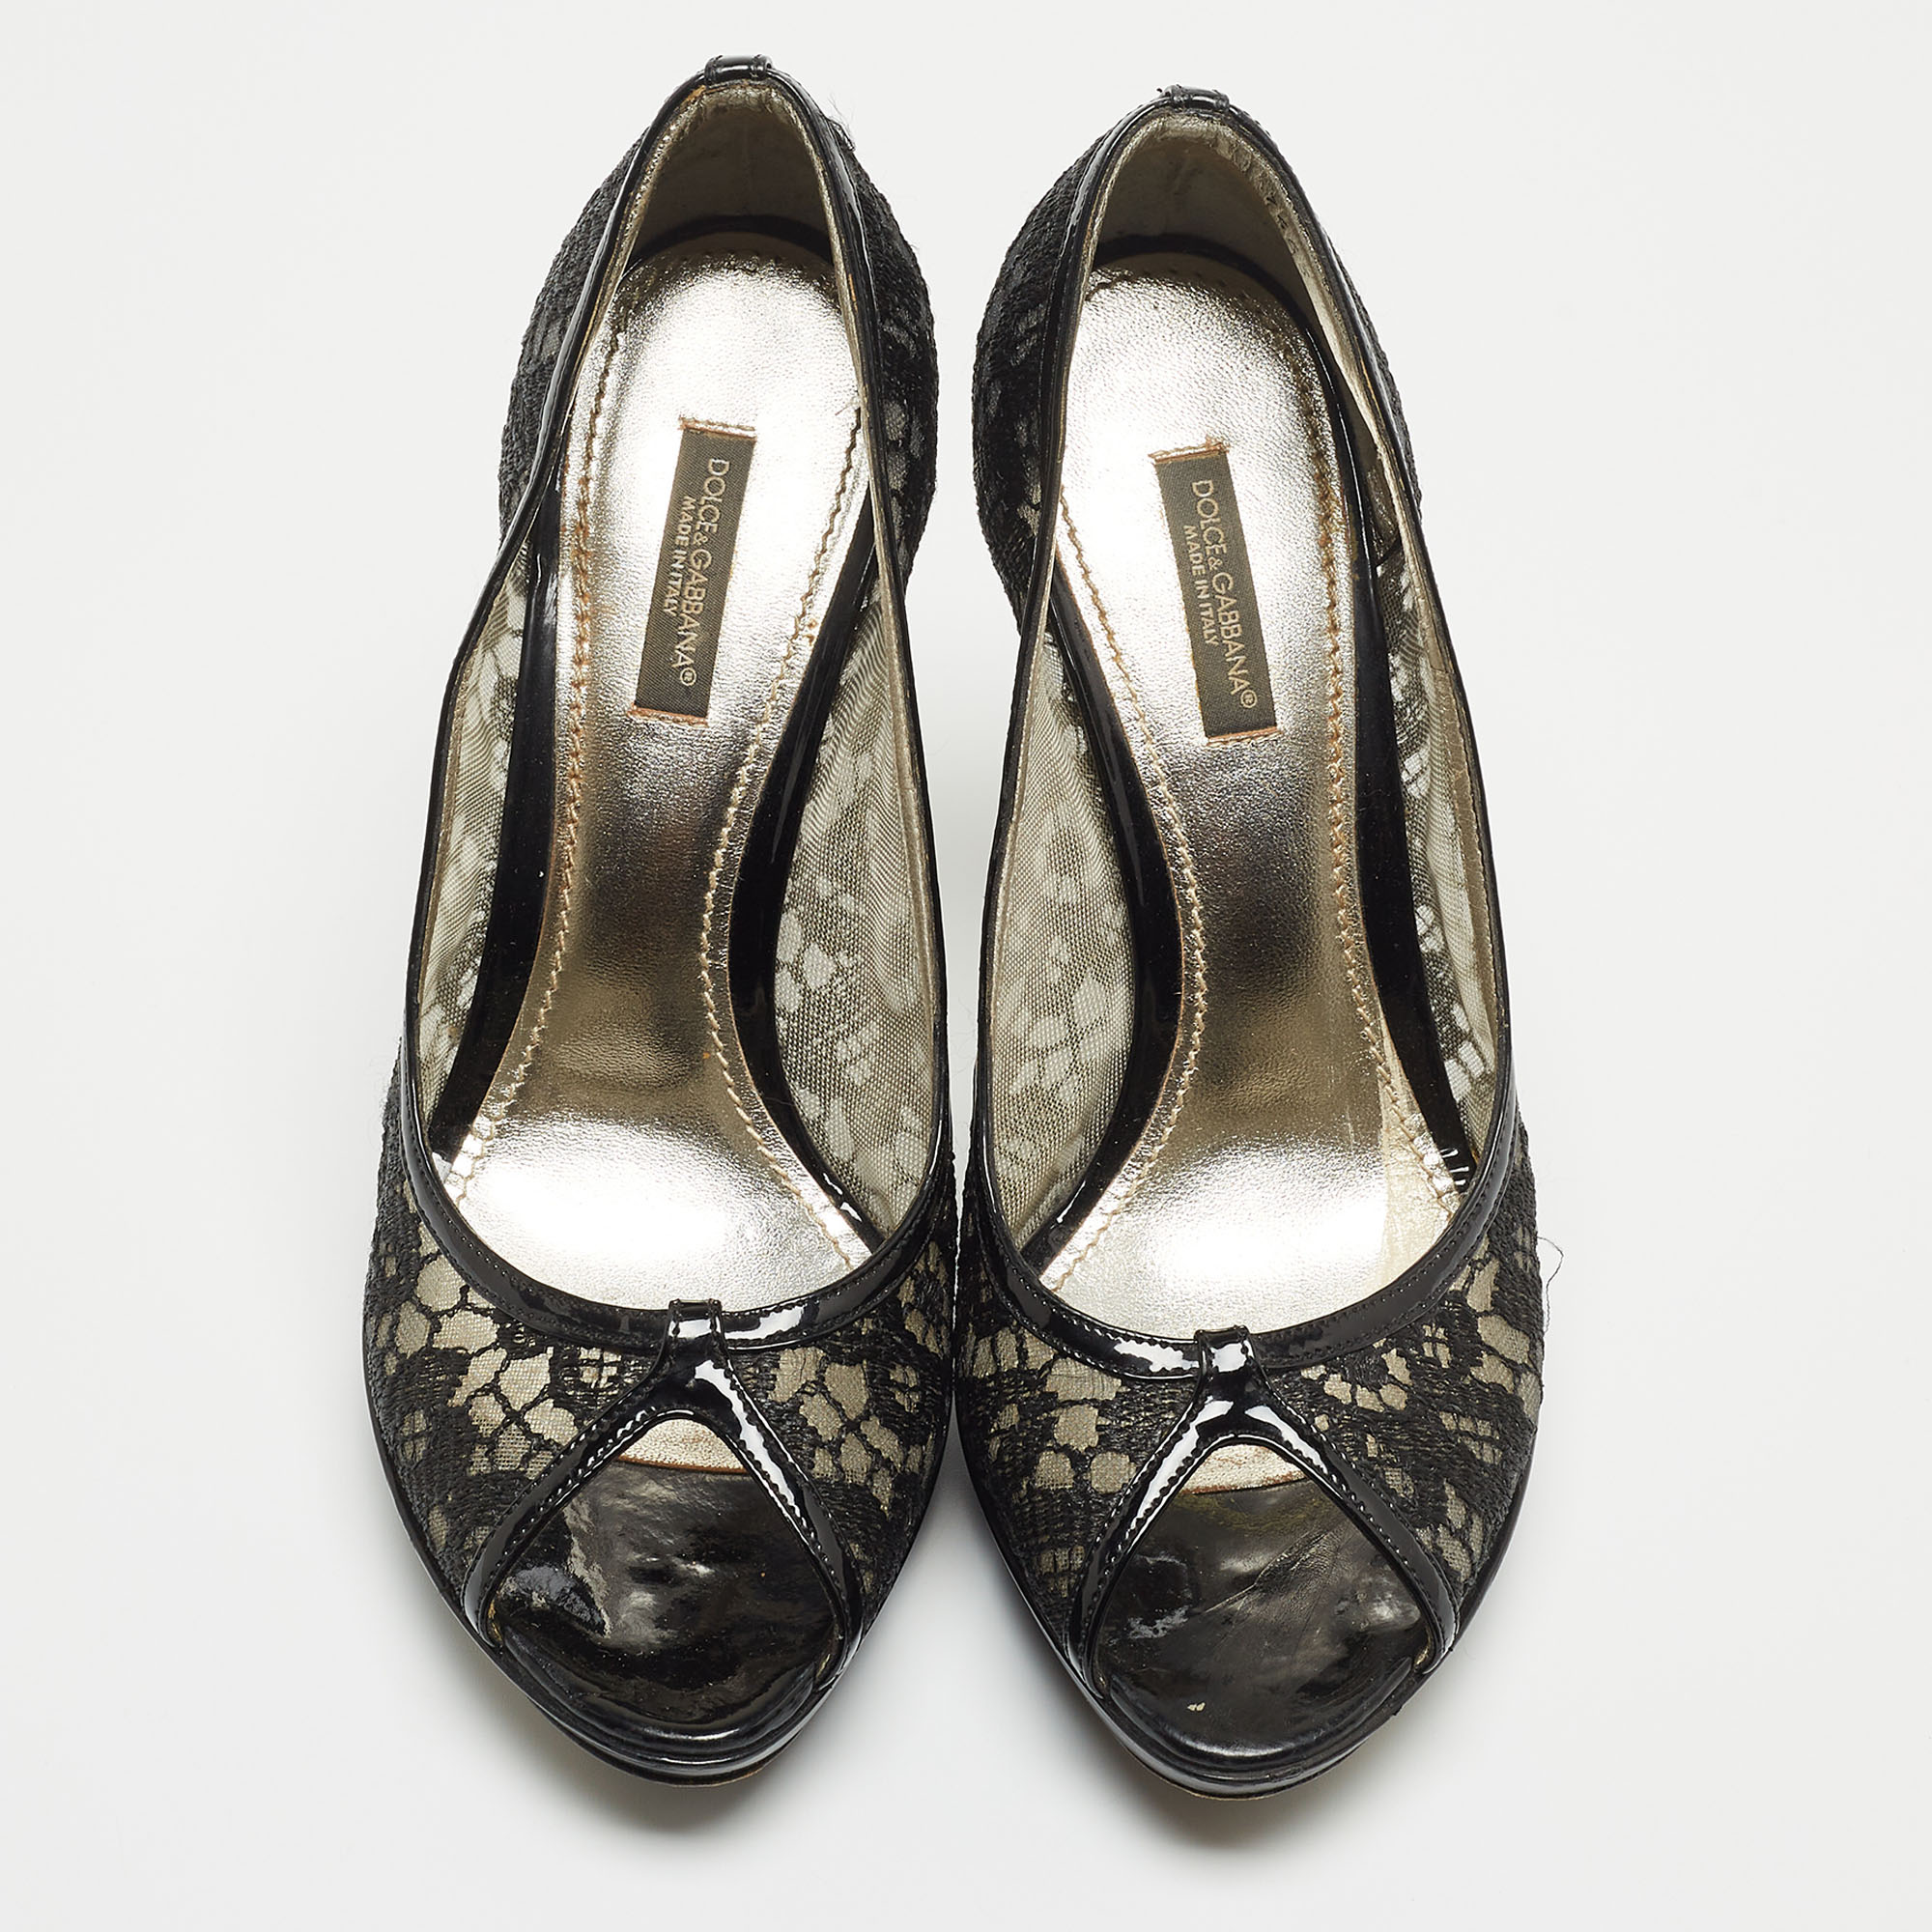 Dolce & Gabbana Black Lace And Patent Leather Open Toe Pumps Size 38.5